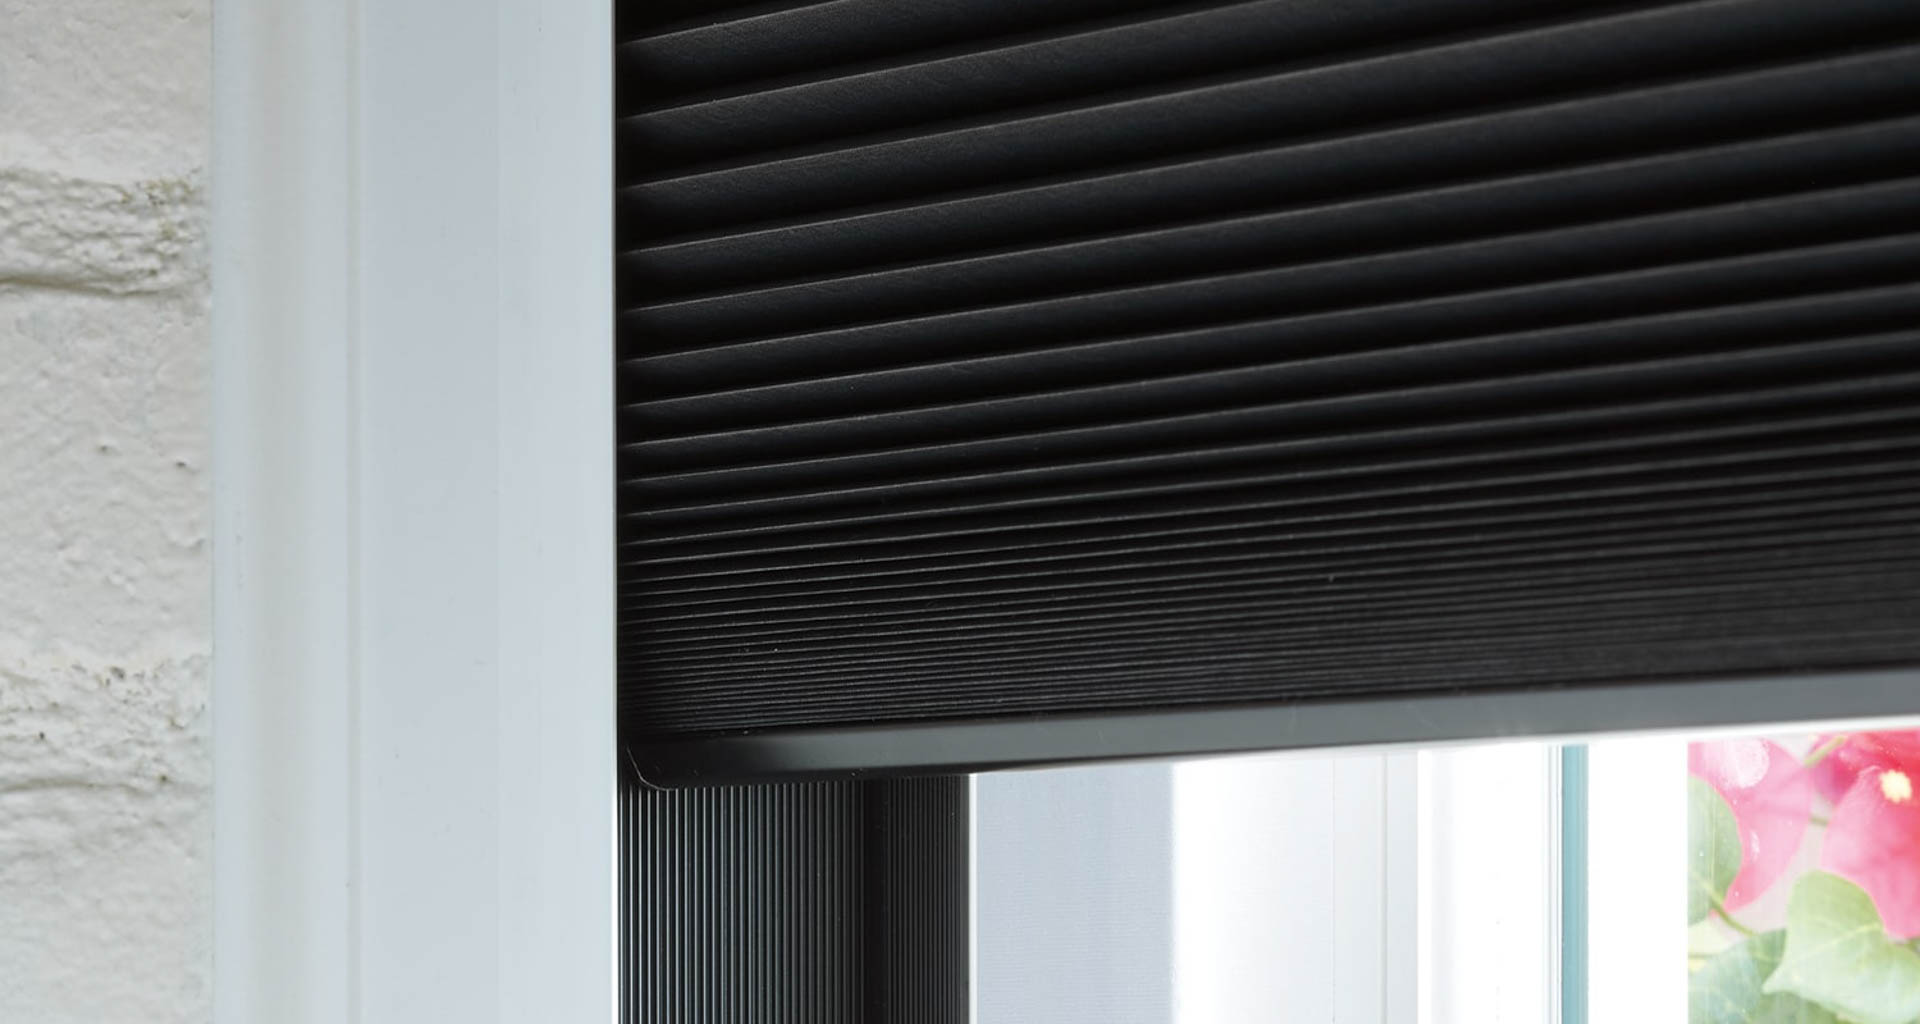 Window shades can help modulate the incoming natural light in your office space. By adding automation, shades like these can open and close during the day to optimize lighting and save on energy. Image: Hunter Douglas.